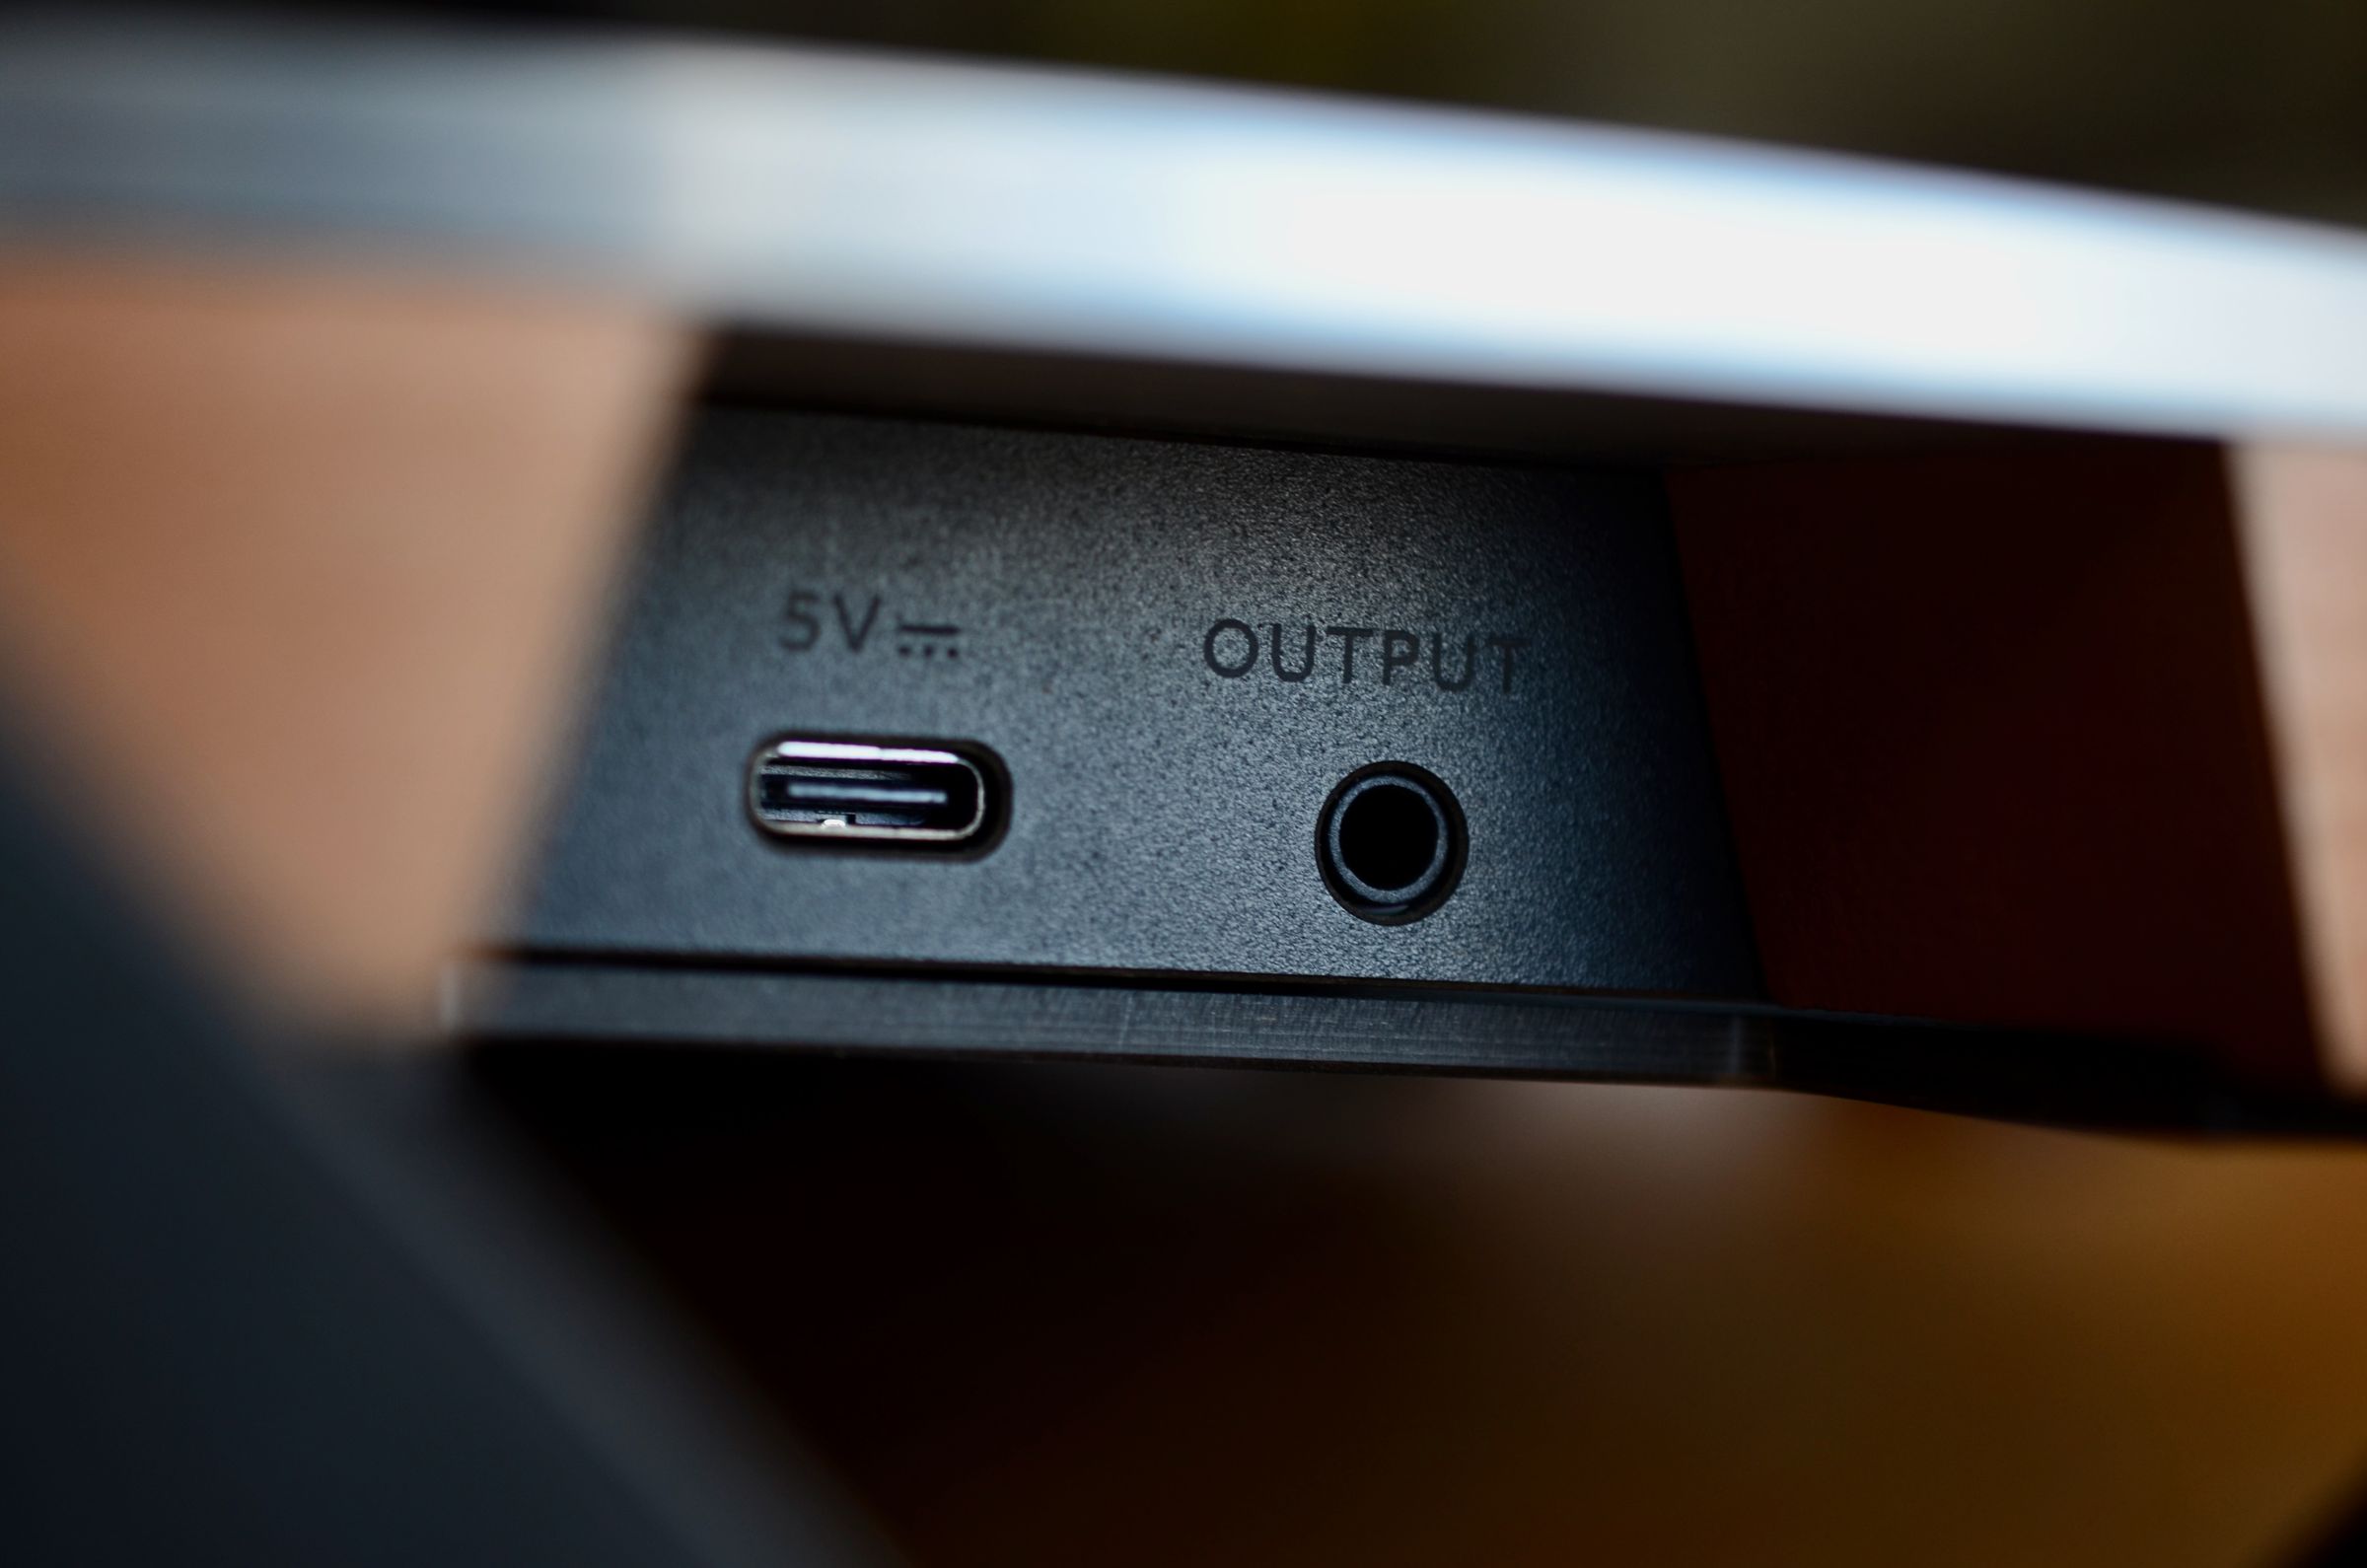 USB-C for power and a 3.5mm audio jack for sound located along the bottom edge of the Wheel 2.